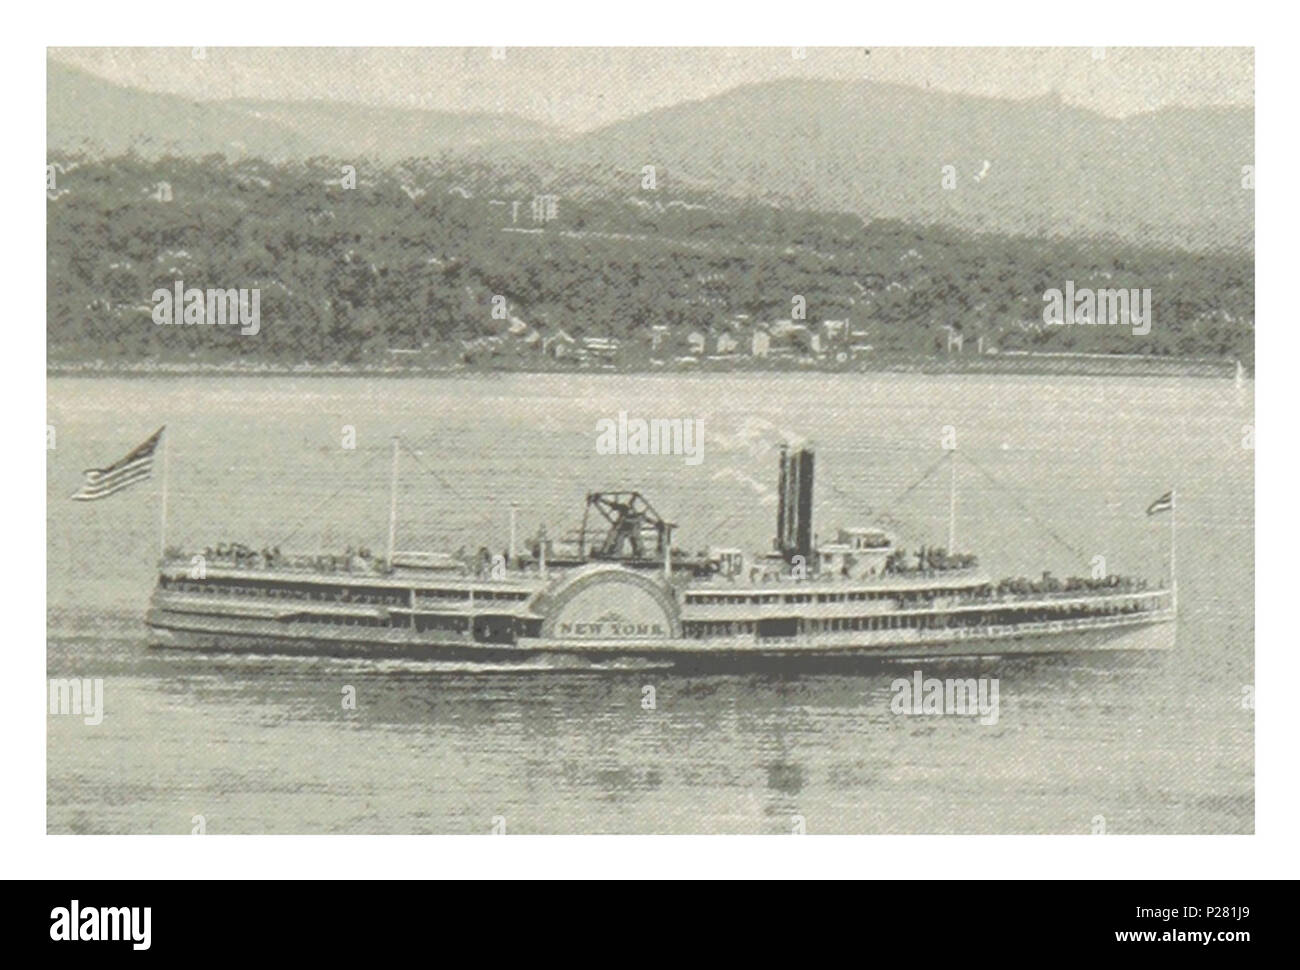 (King1893NYC) pg109 Le Day-Line Hudson-River paquebot NEW YORK. Banque D'Images